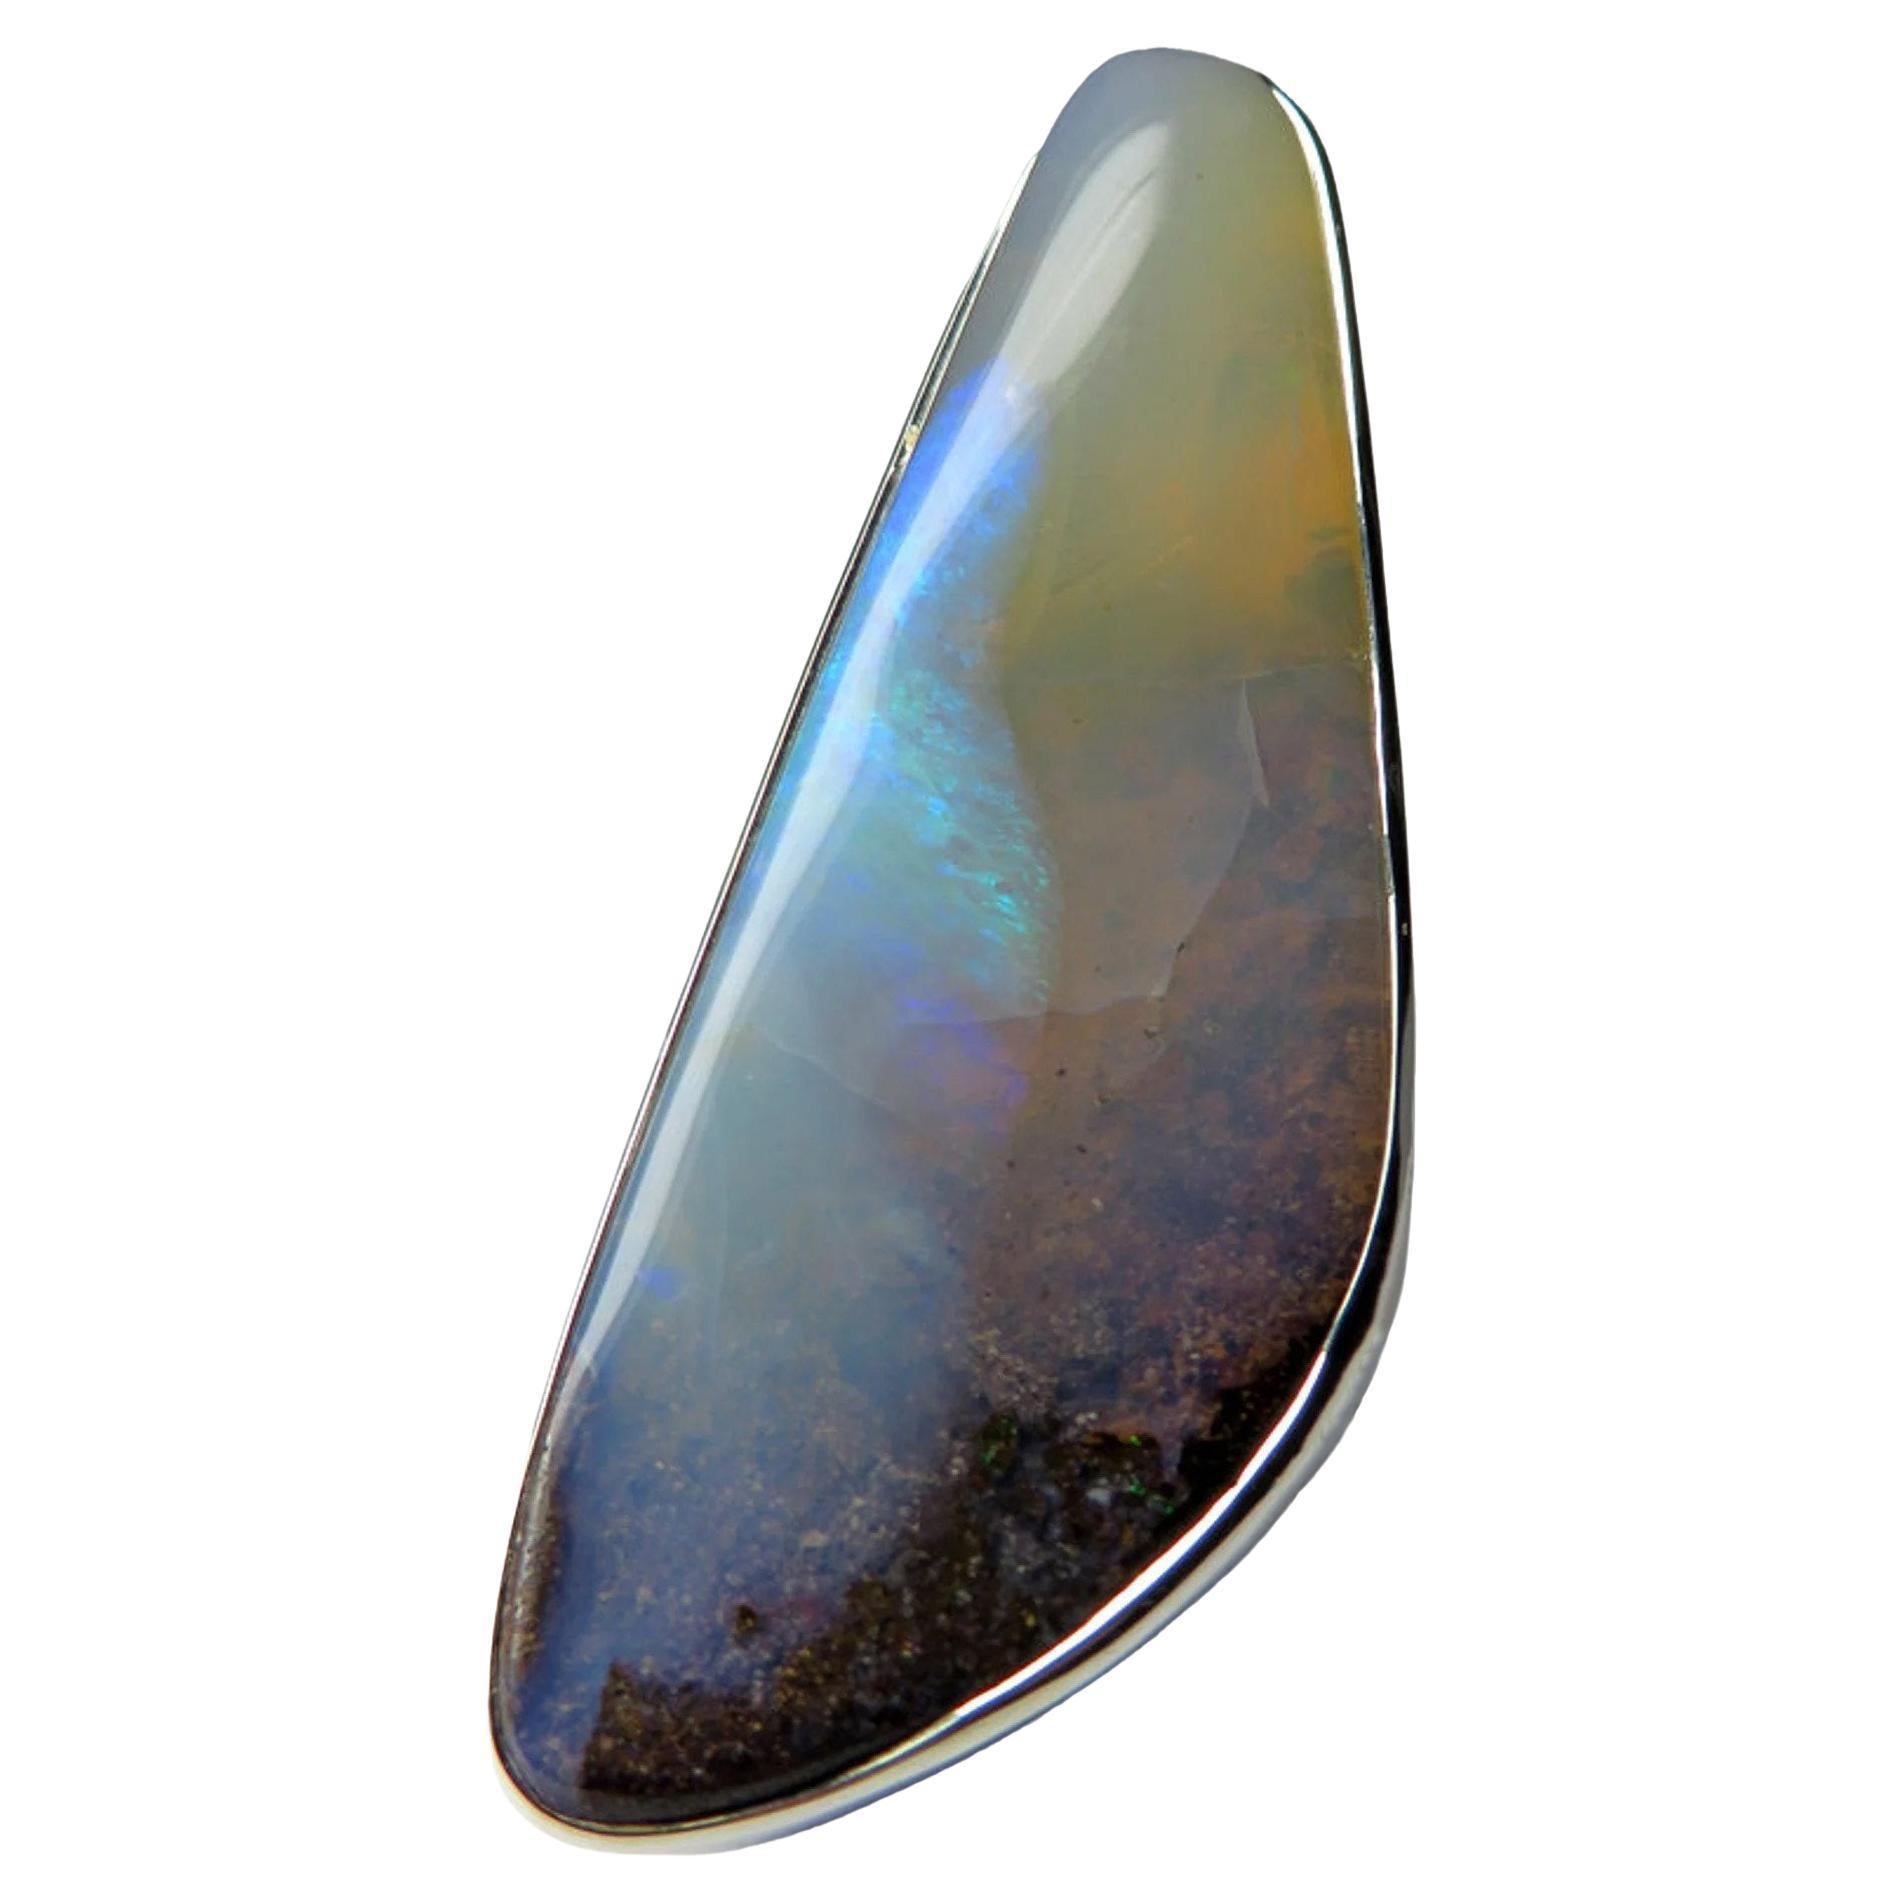 Big silver pendant with natural Boulder Opal
opal origin - Australia 
opal weight - 83 carats
pendant weight - 24.97 grams
pendant height - 2.76 in / 70 mm
opal measurements - 0.55 x 0.71 x 1.89 in / 14 х 18 х 48 mm


We ship our jewelry worldwide –